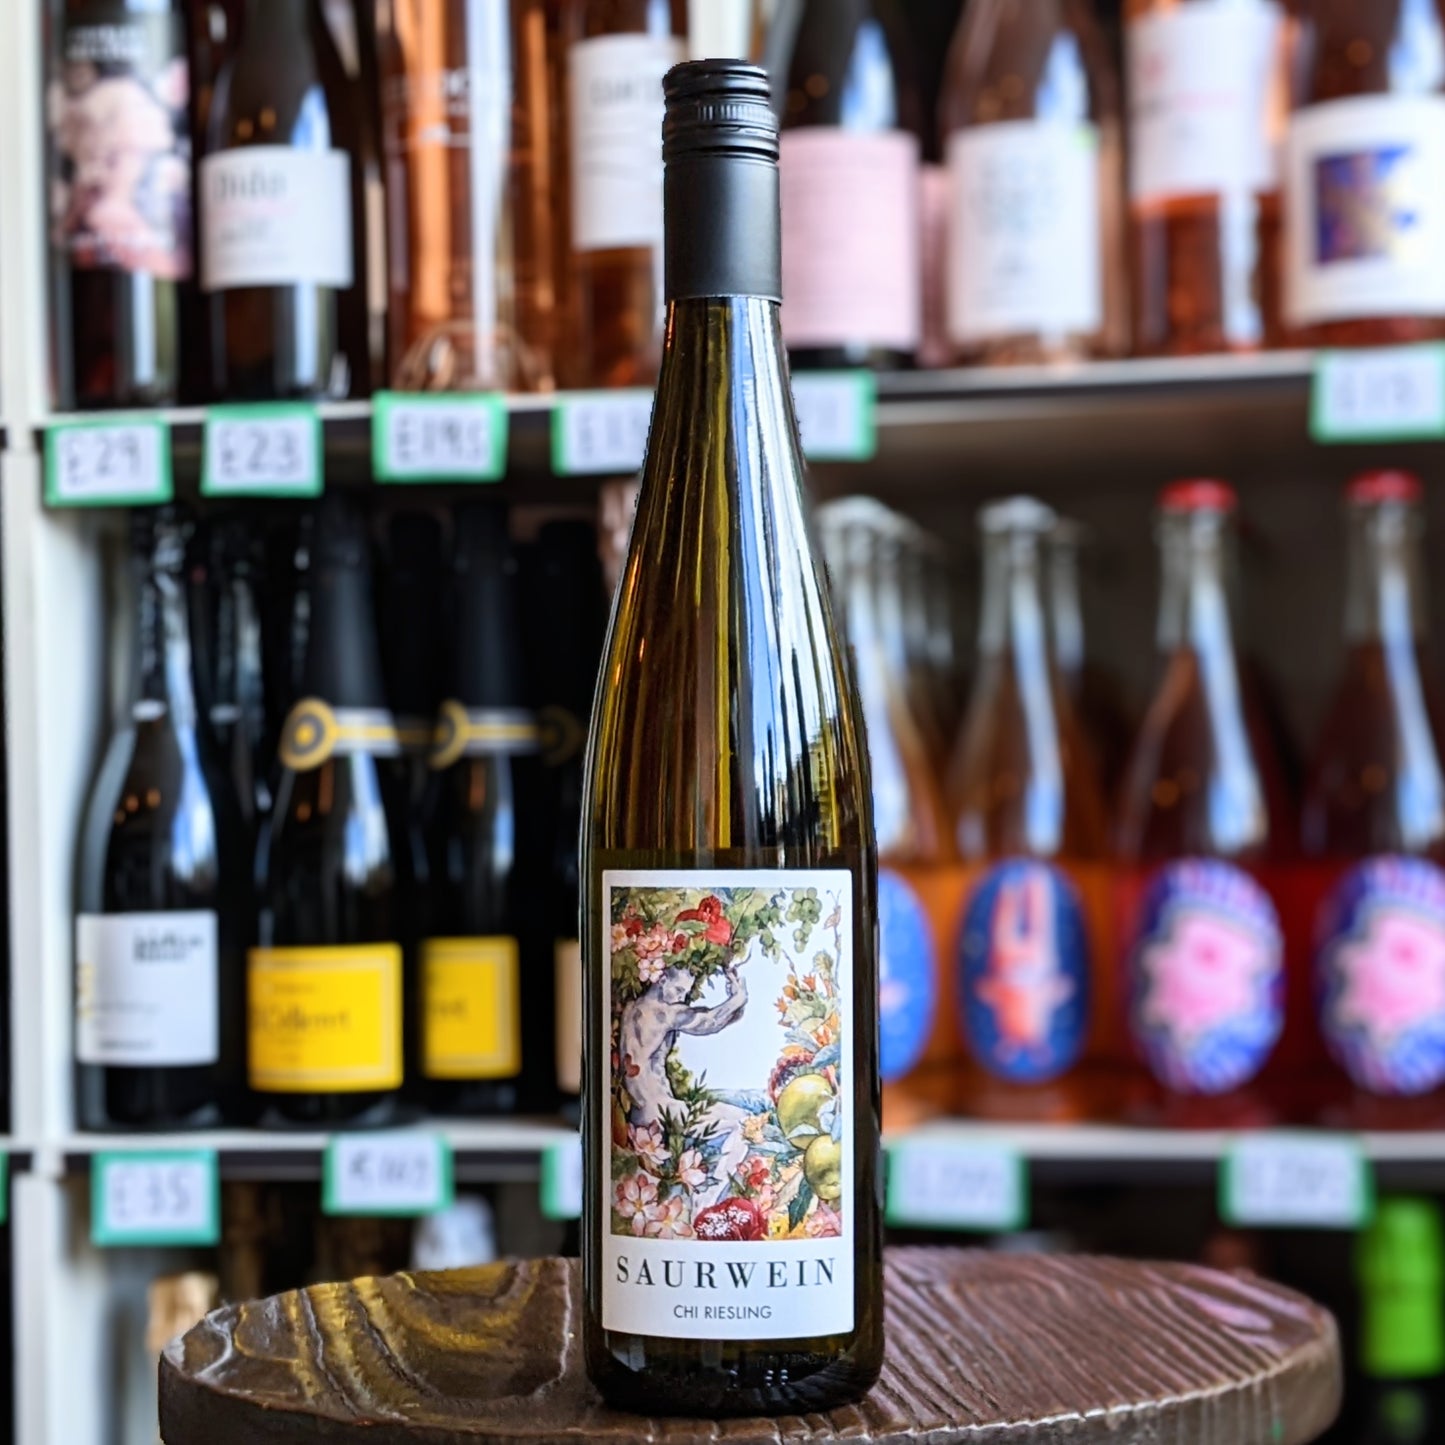 Saurwein, 'Chi', Riesling, Western Cape, South Africa